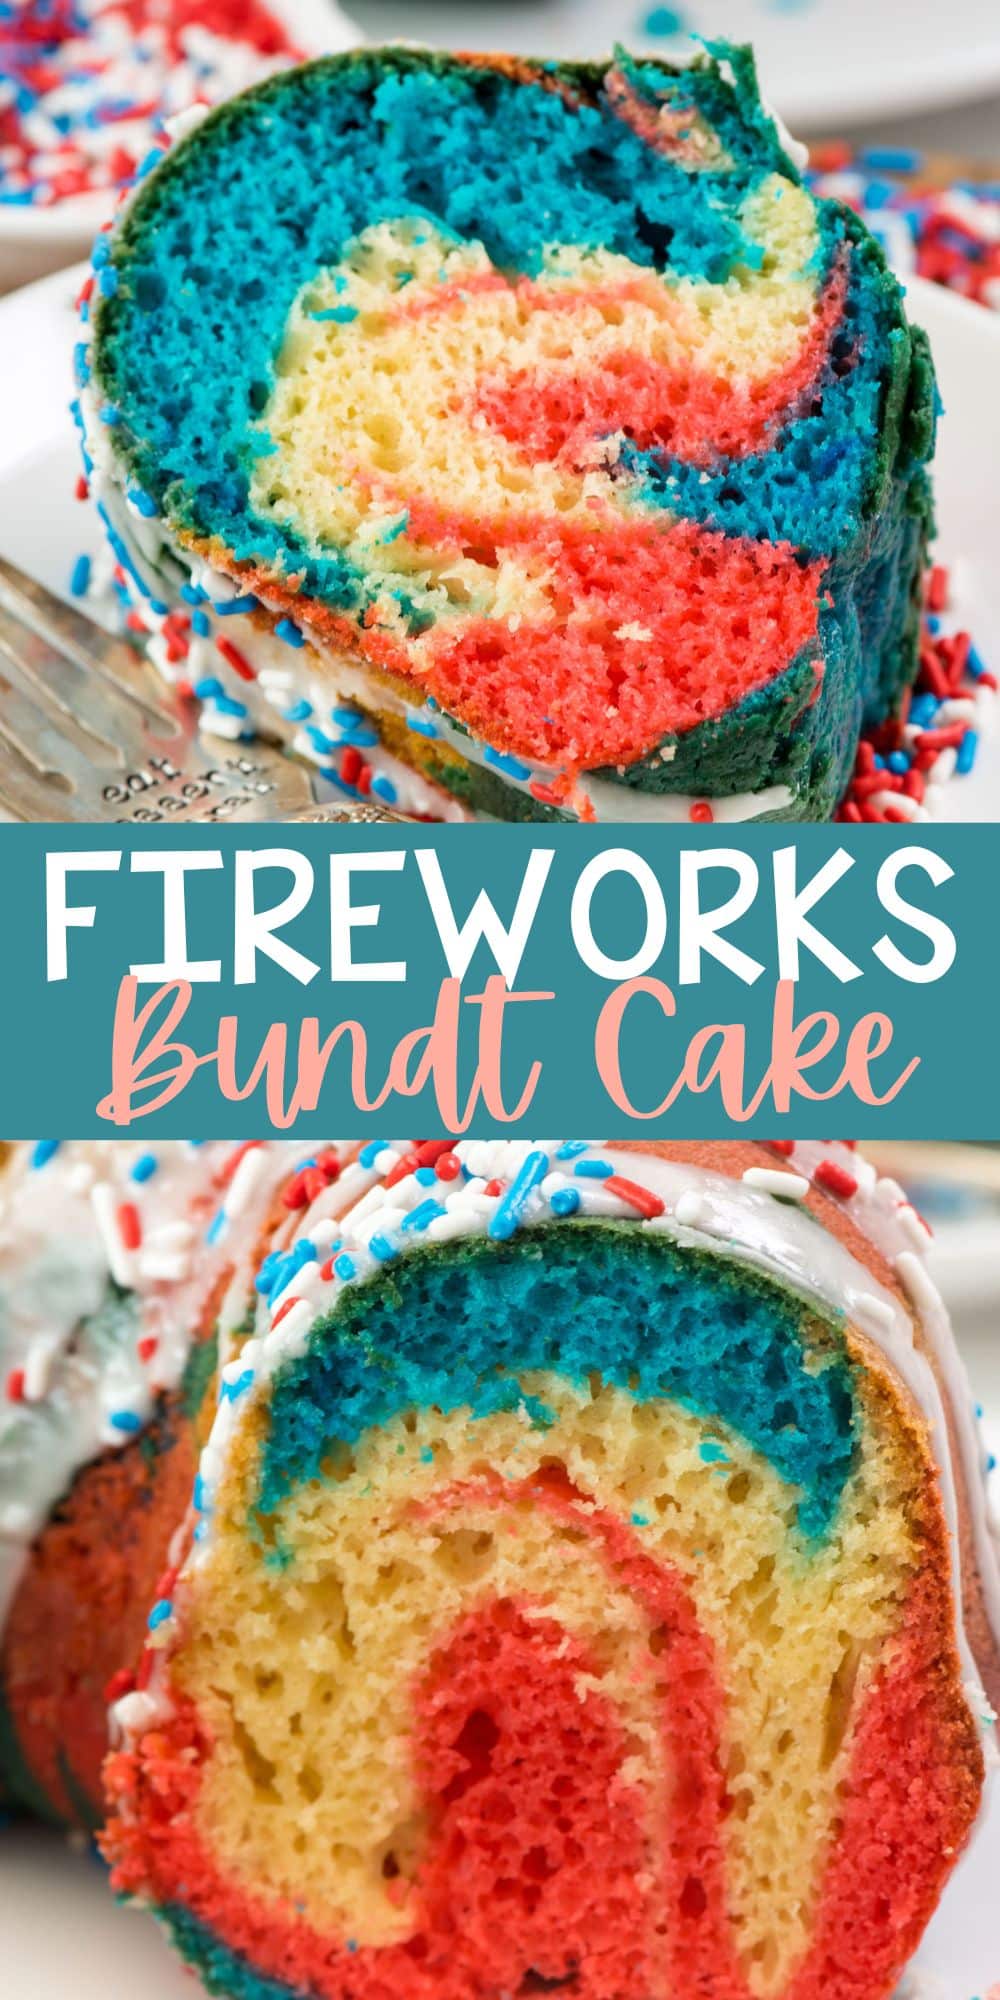 two photos of red and blue swirled bundt cake on a white plate with words on the image.